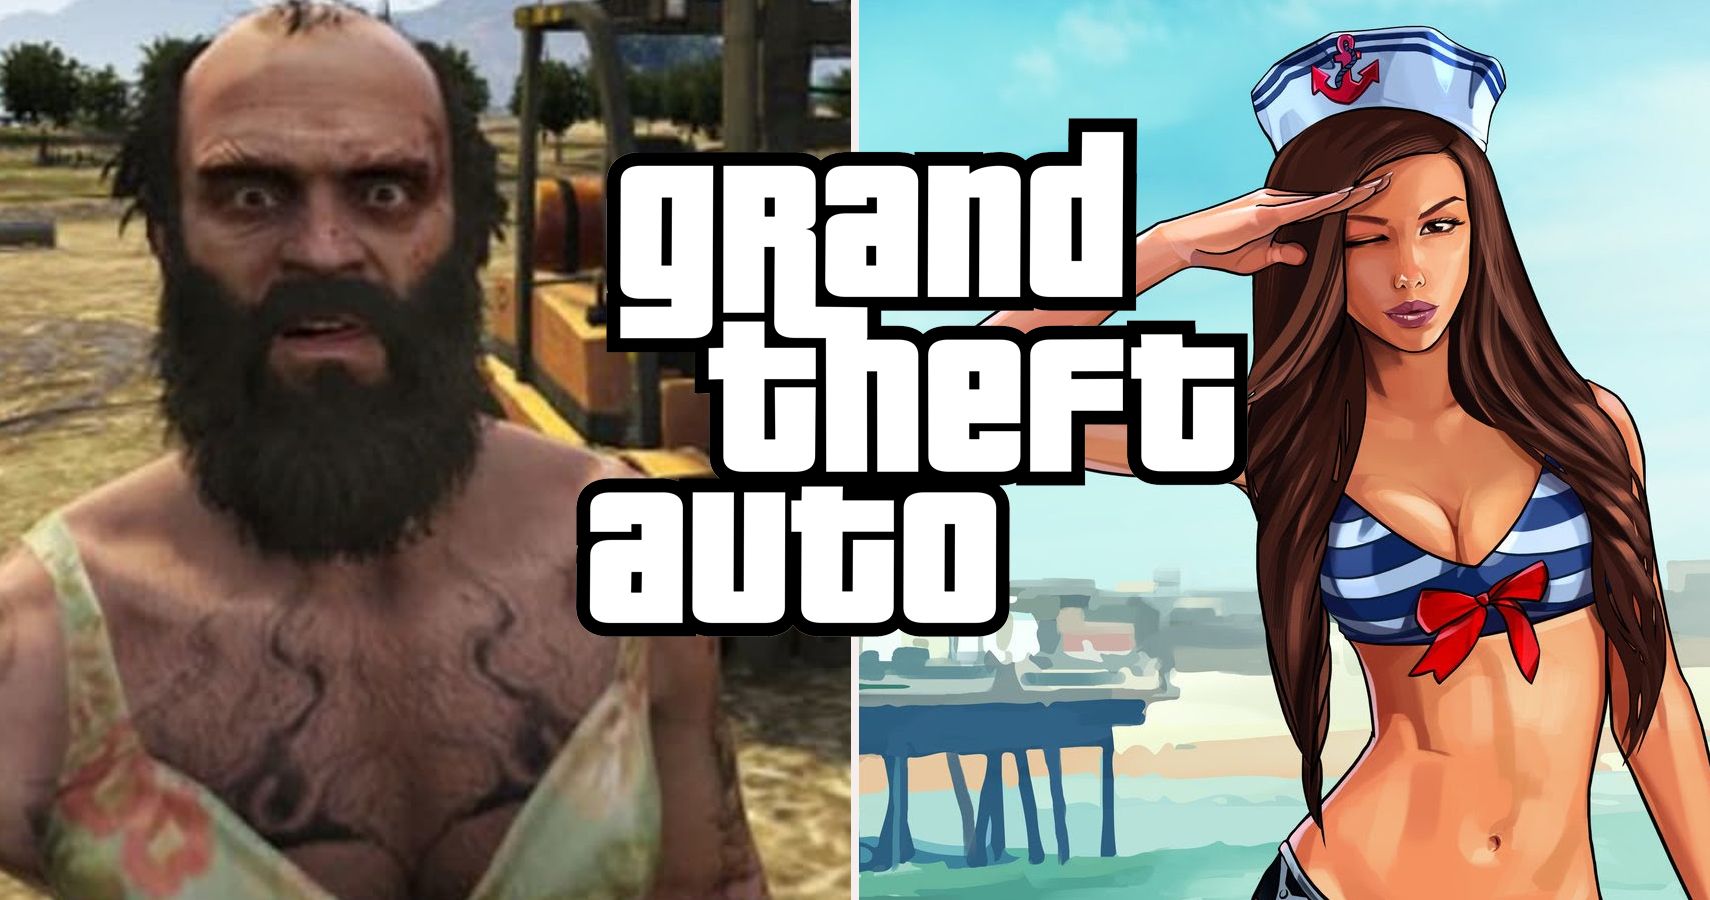 10 Times Grand Theft Auto Made You Feel Totally Gross (And 5 Times You Loved Being Twisted)